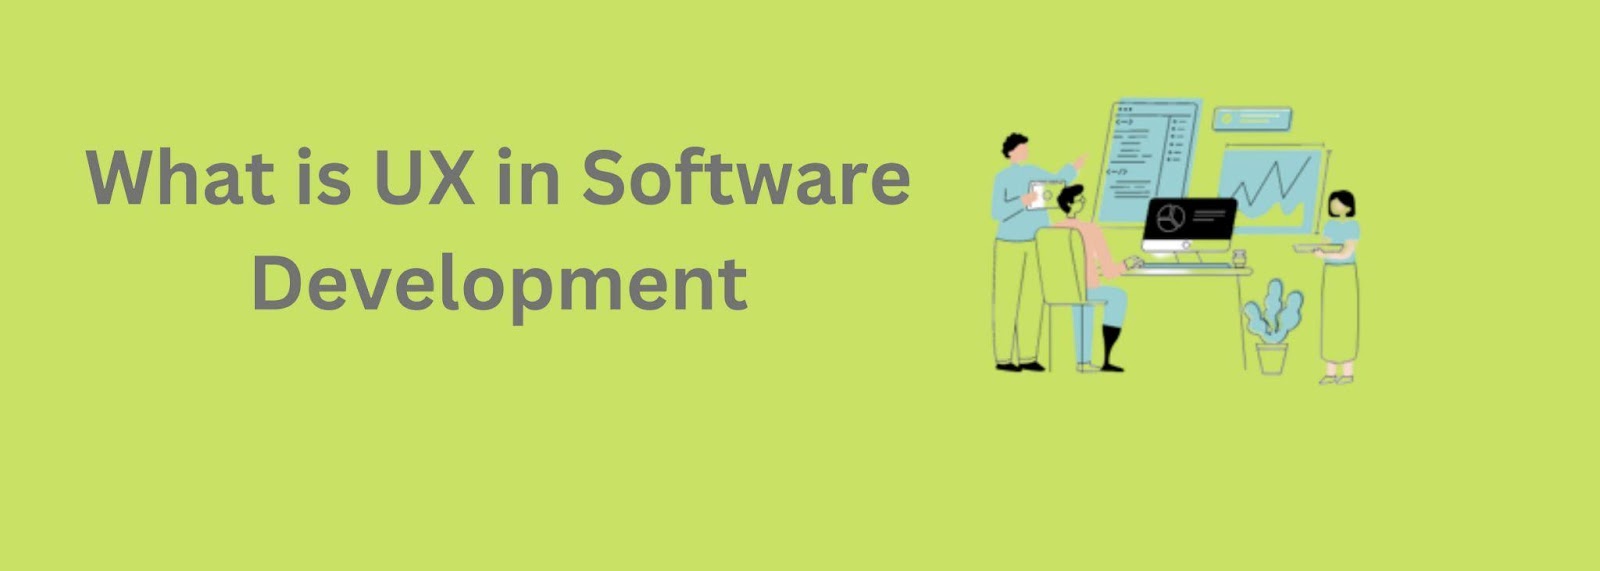 What is UX in Software Development